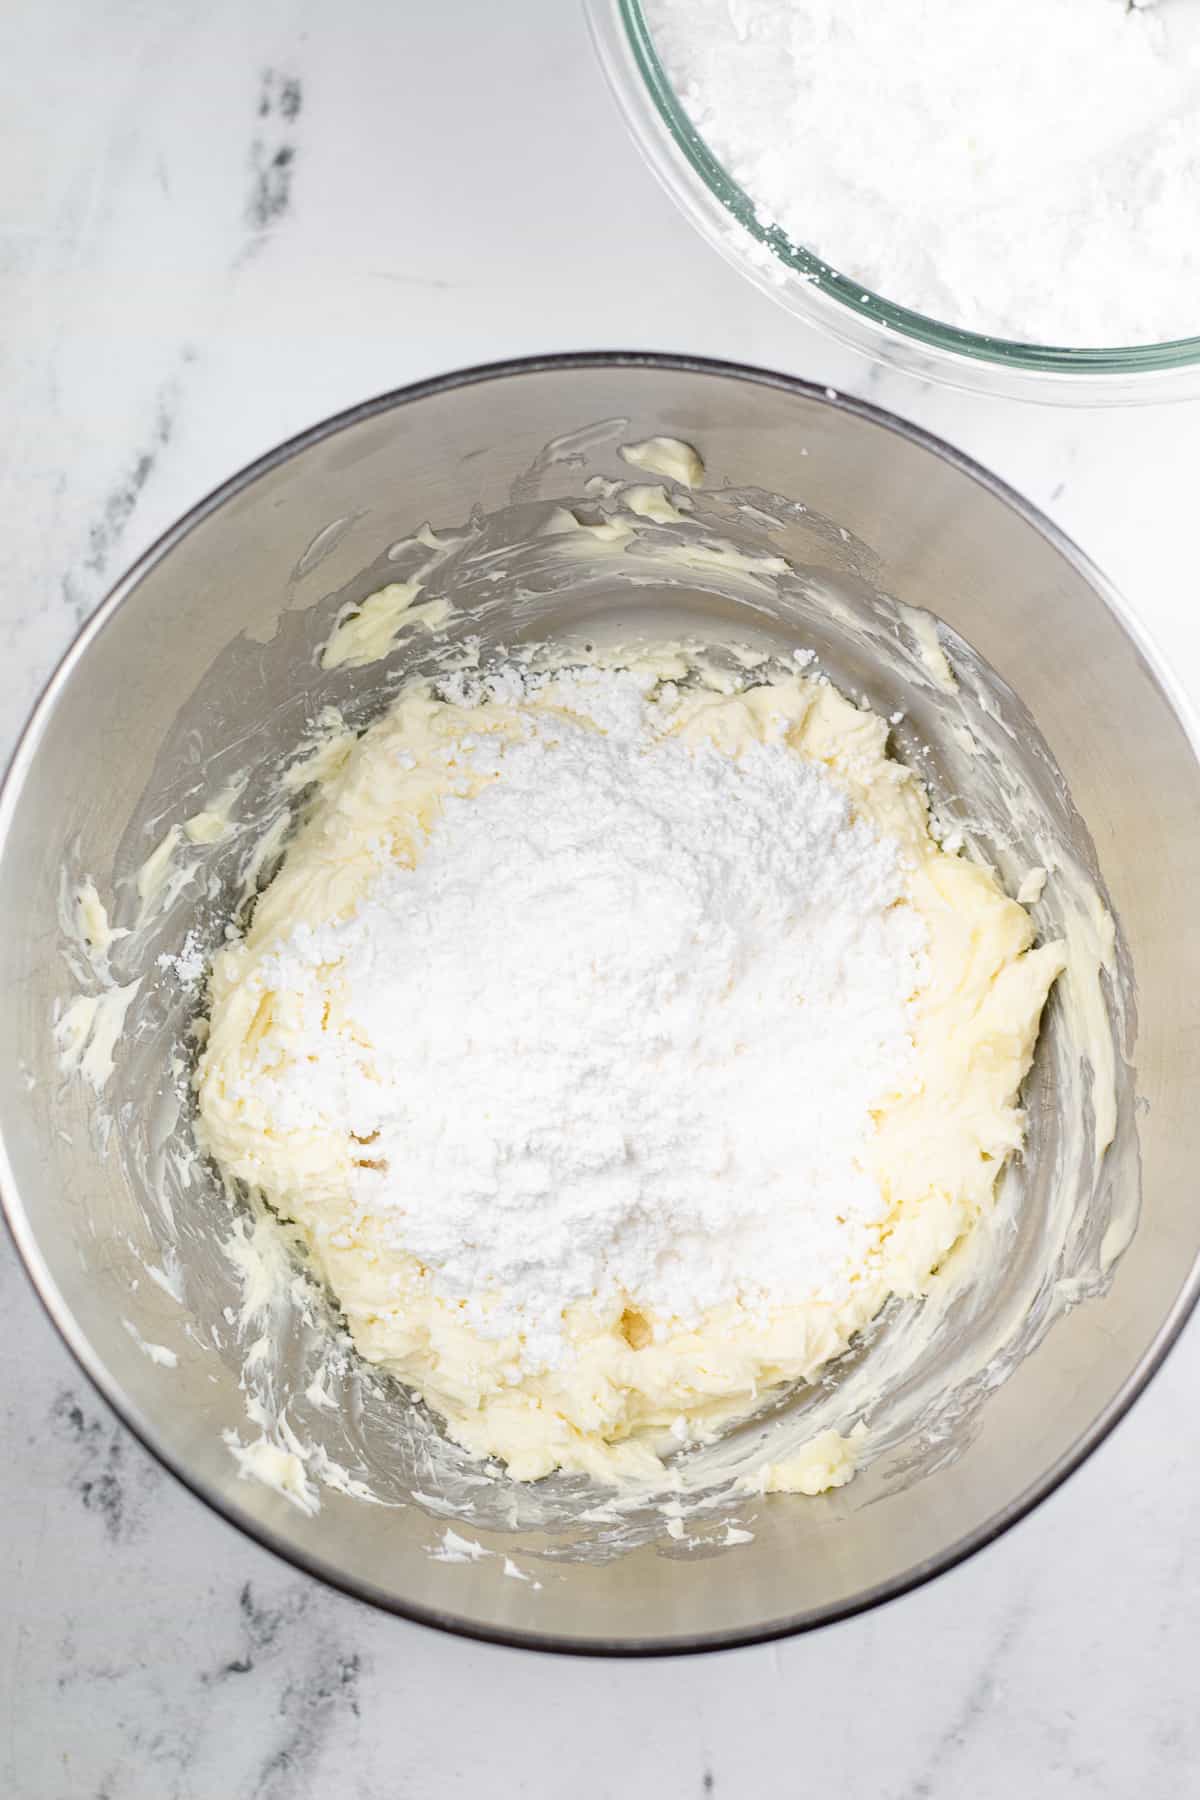 Mixing powdered sugar into a butter cream cheese mixture in a mixing bowl on a counter from overhead.